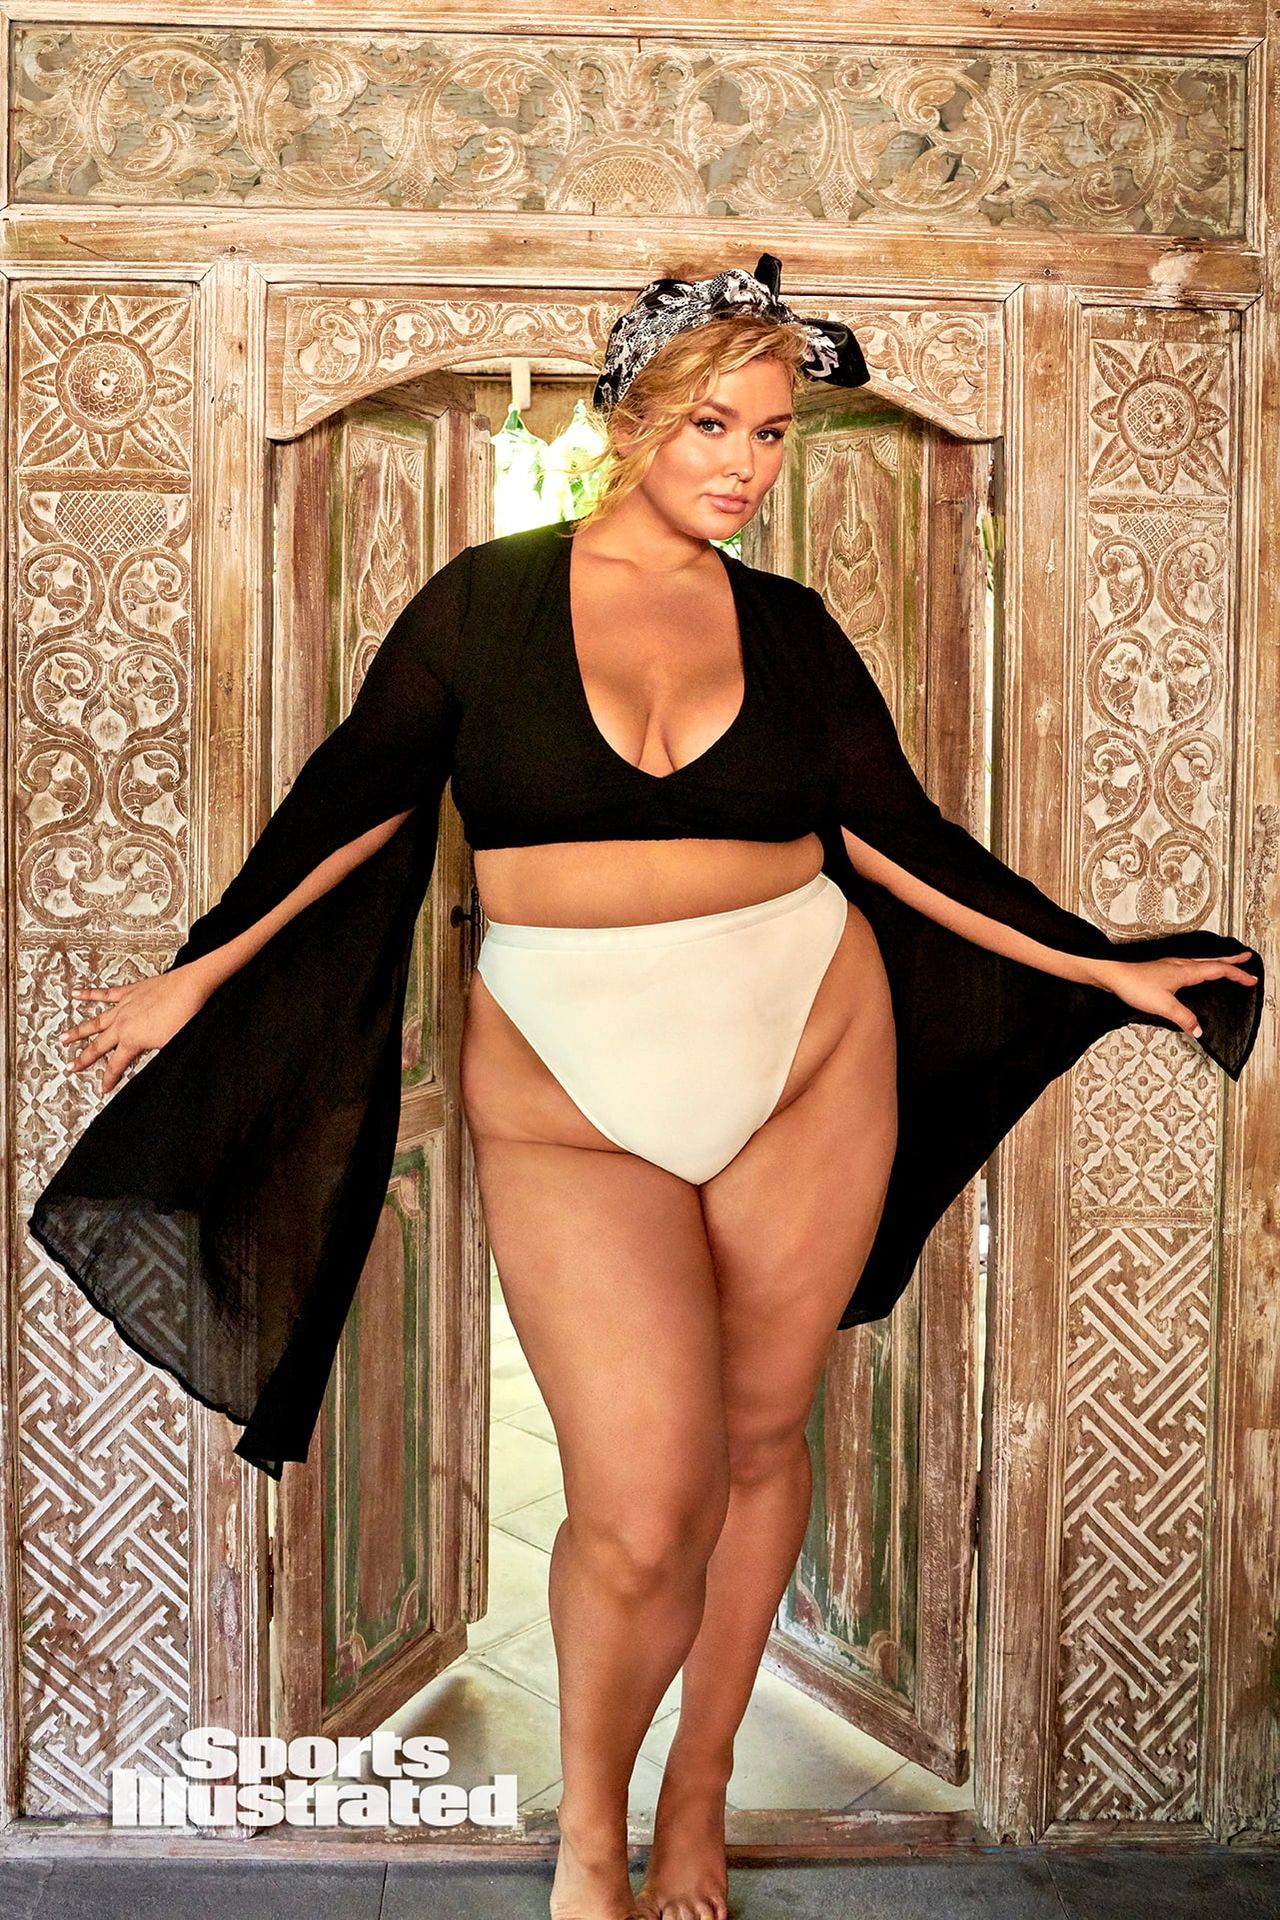 Hunter McGrady says she’s pregnant with her first child